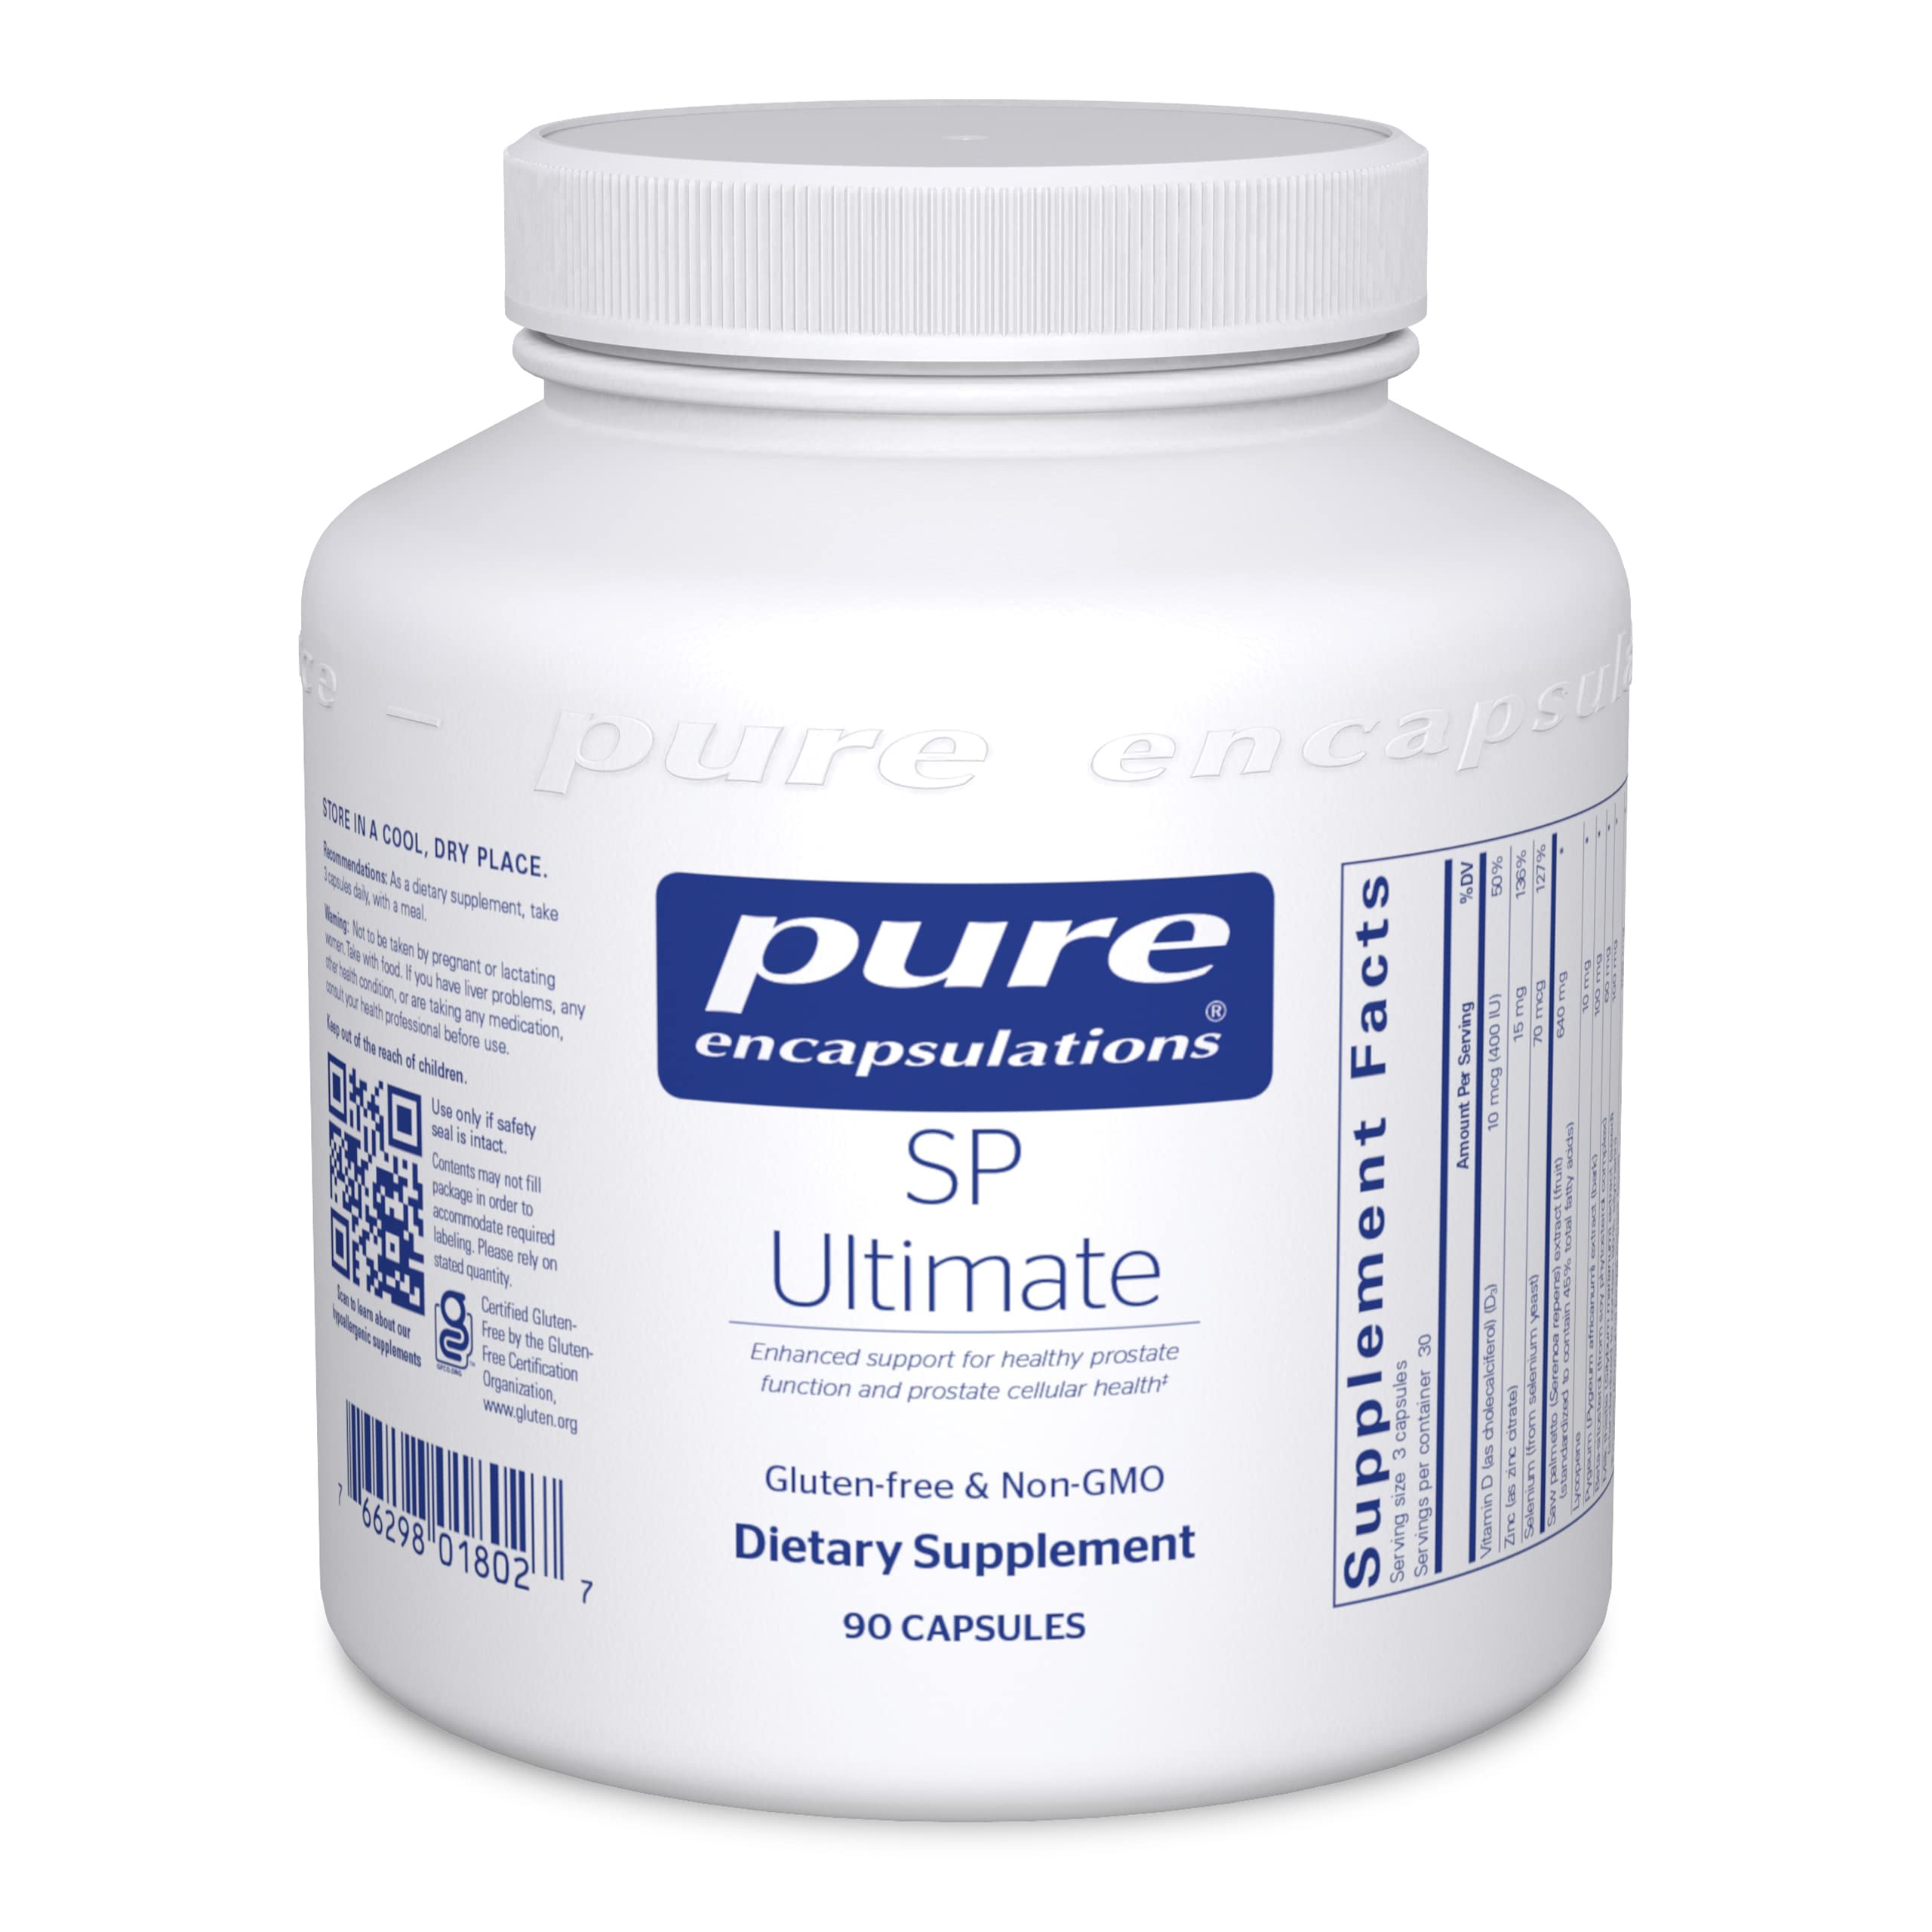 Pure Encapsulations - SP Ultimate - Enhance Support for Healthy Prostate Function and Prostate Cellular Health* - 90 Capsules